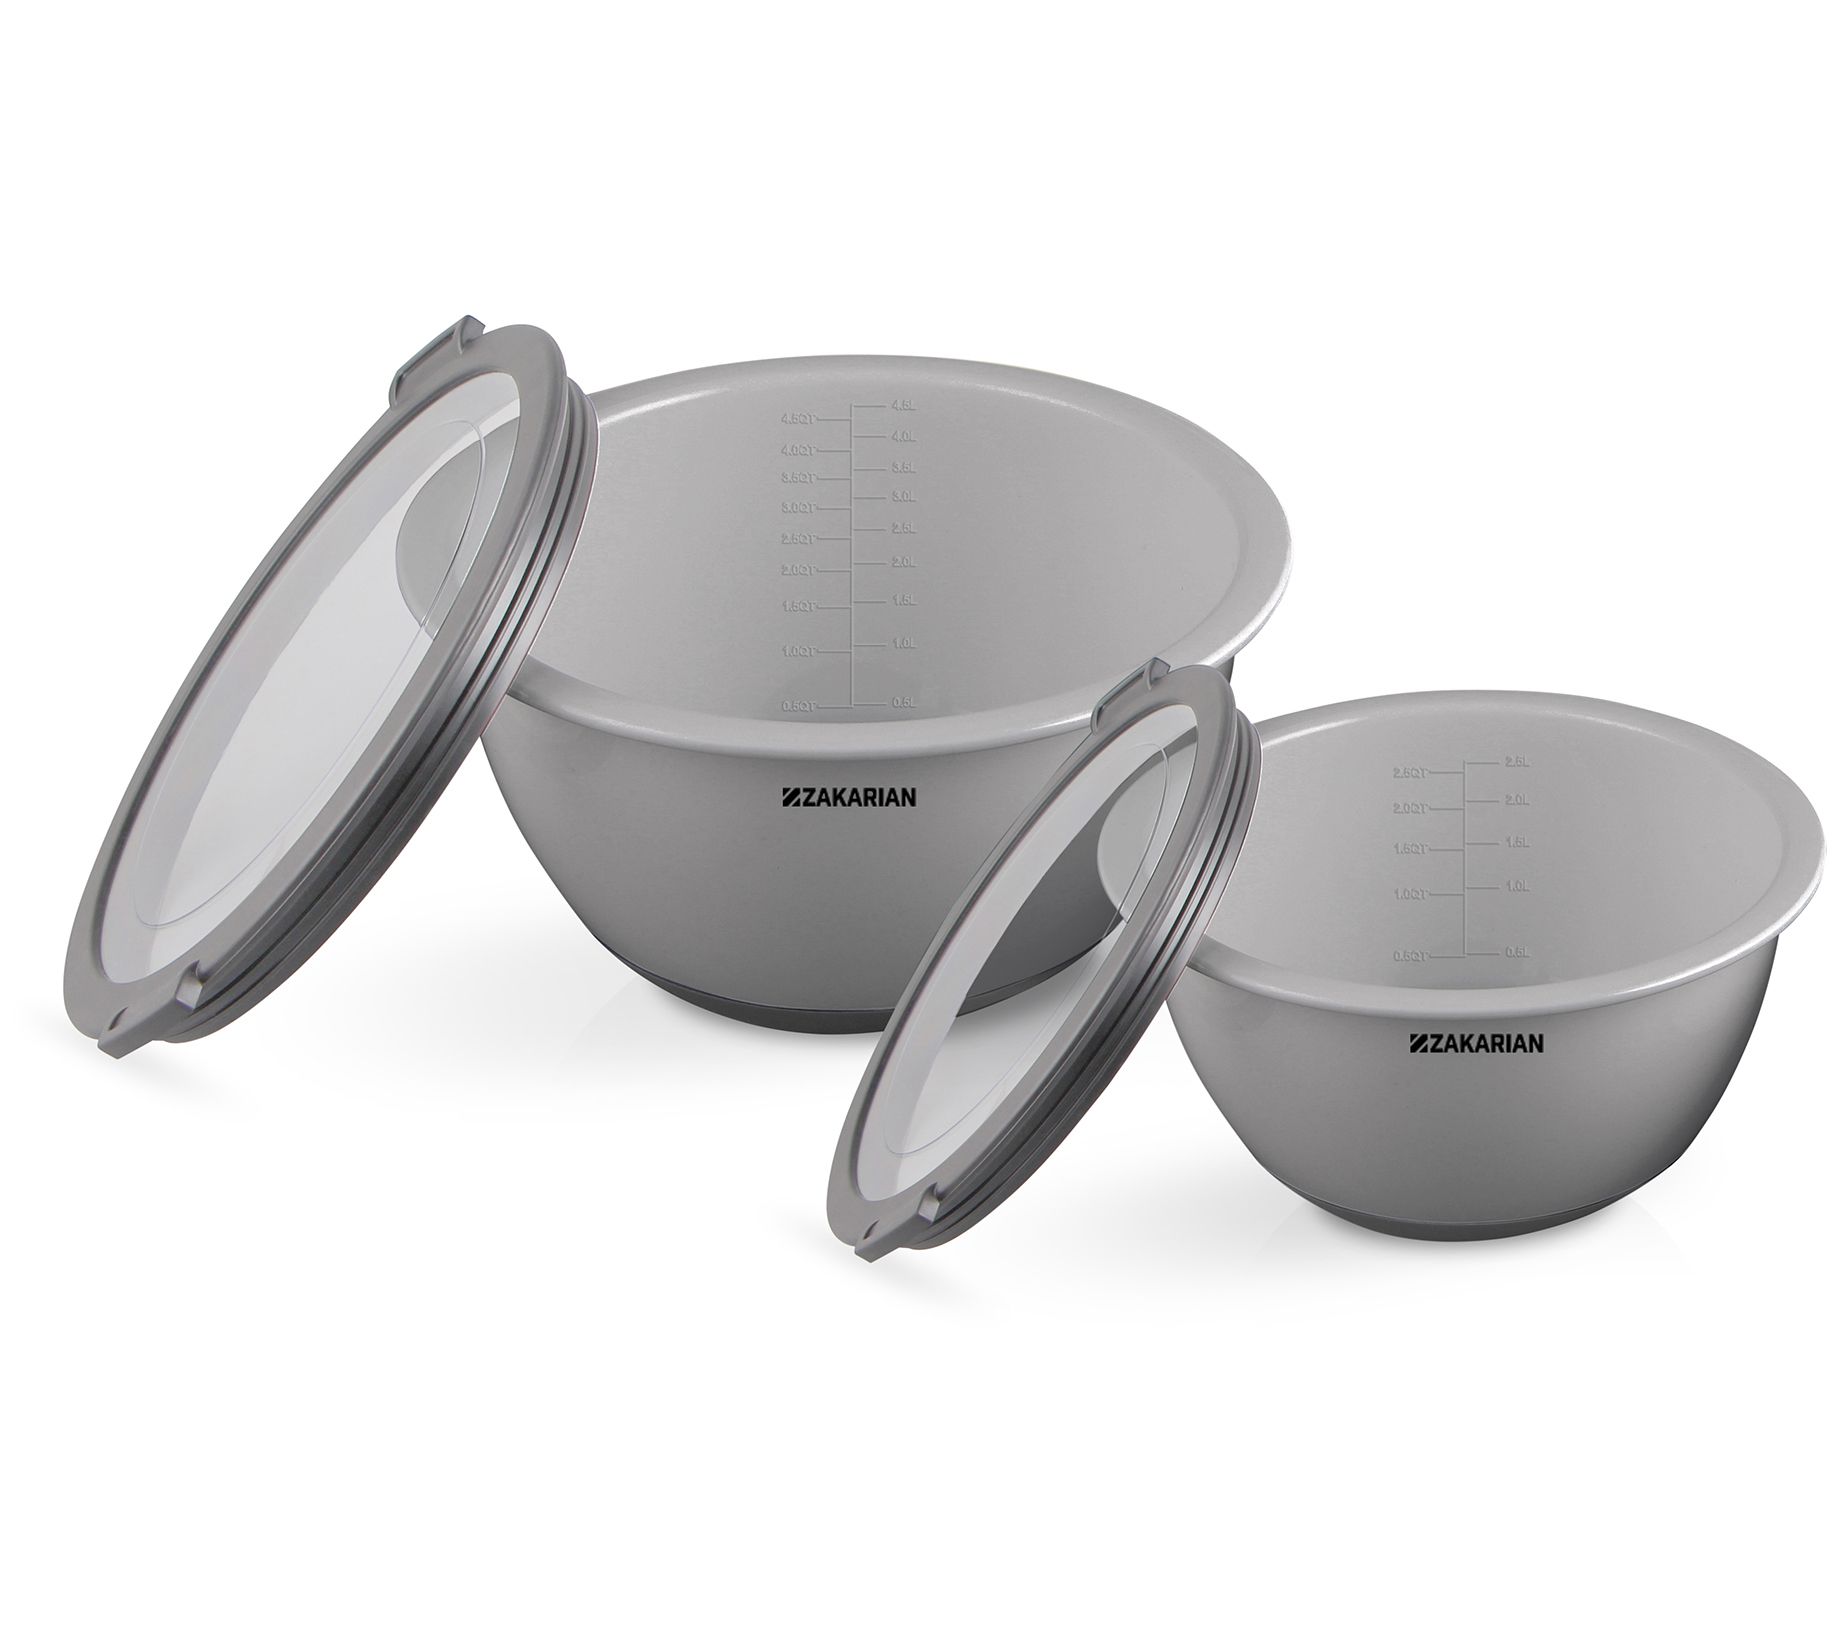 Gourmet Kitchen 3 Pc Bowl Set With Transparent Lids For Mixing